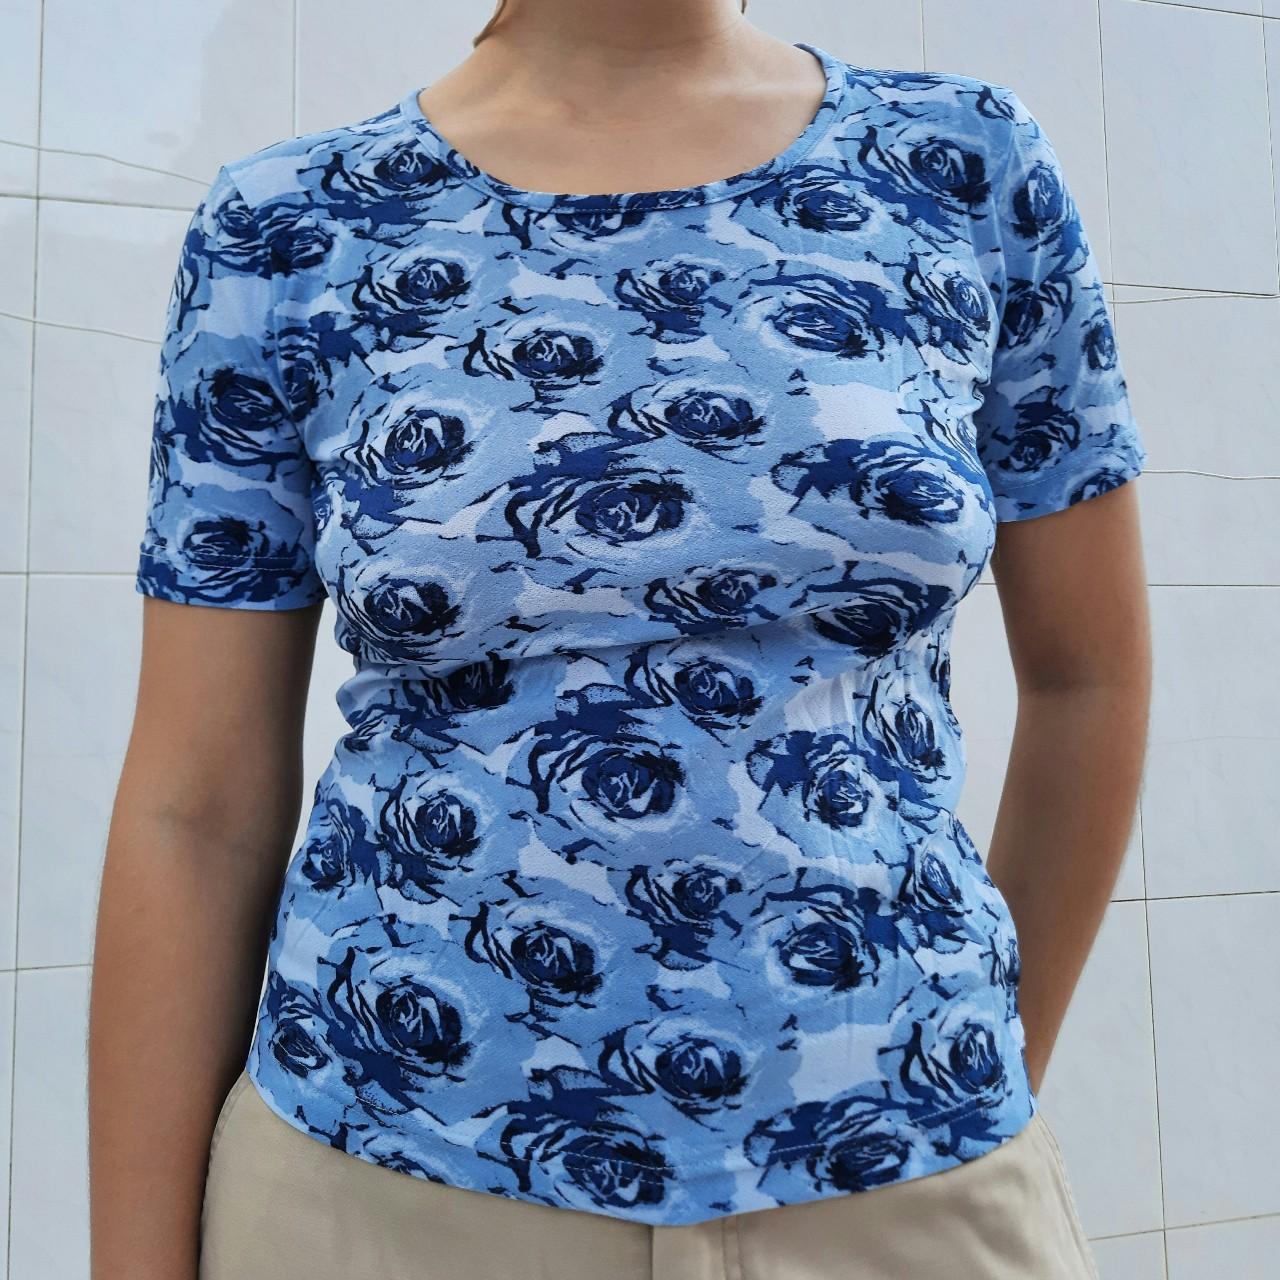 Blue Roses Women's Blue and Navy T-shirt (4)